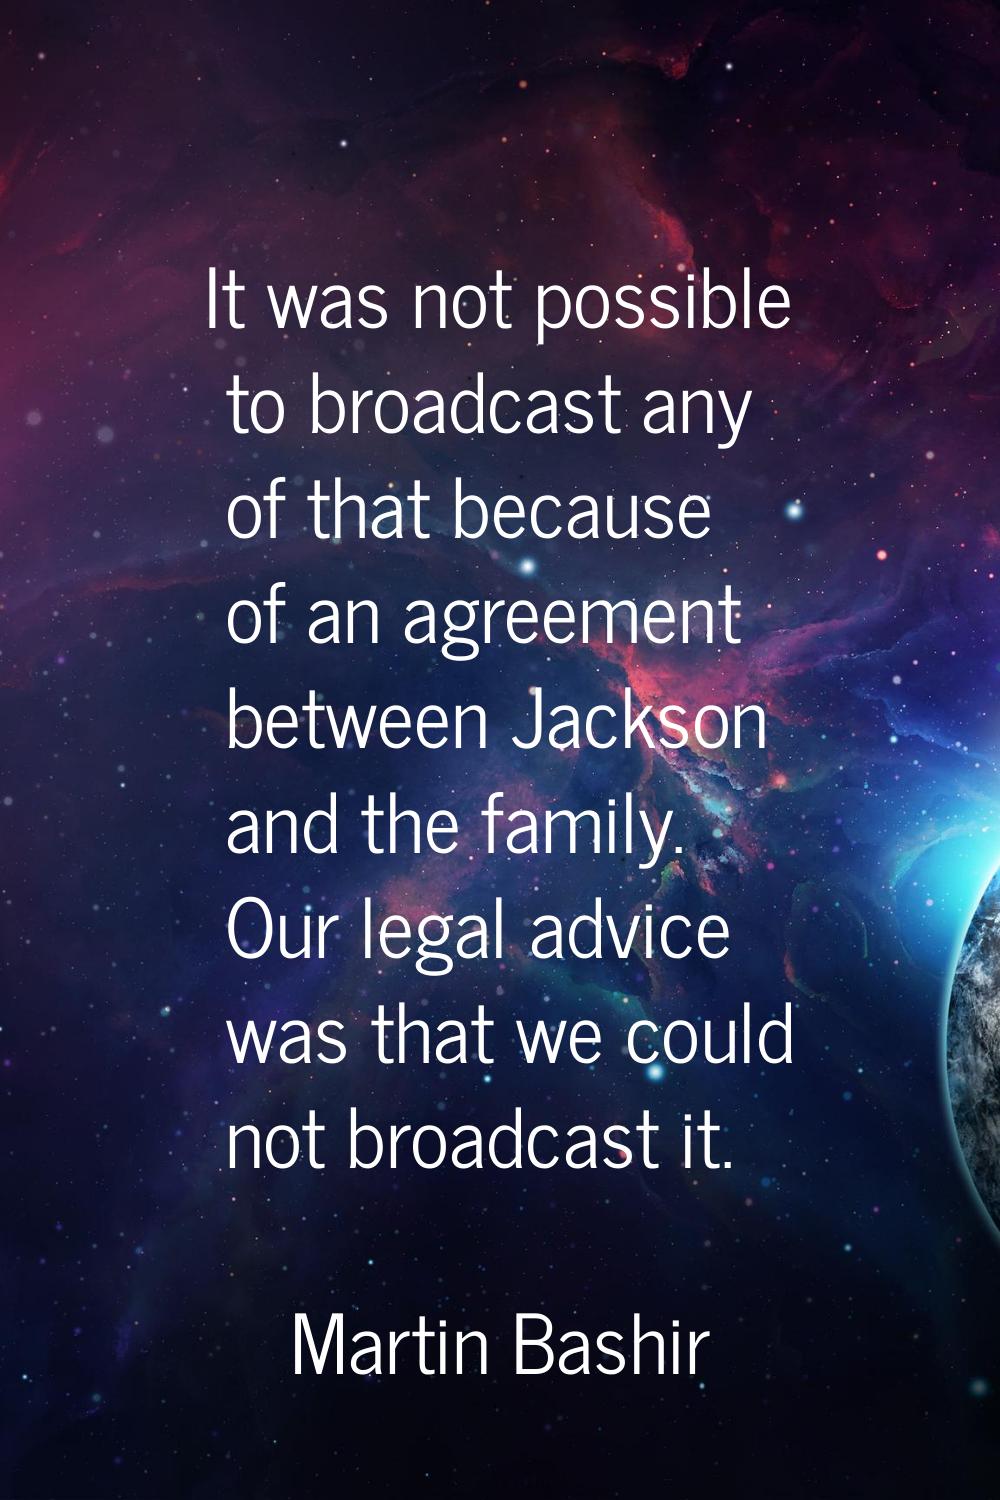 It was not possible to broadcast any of that because of an agreement between Jackson and the family